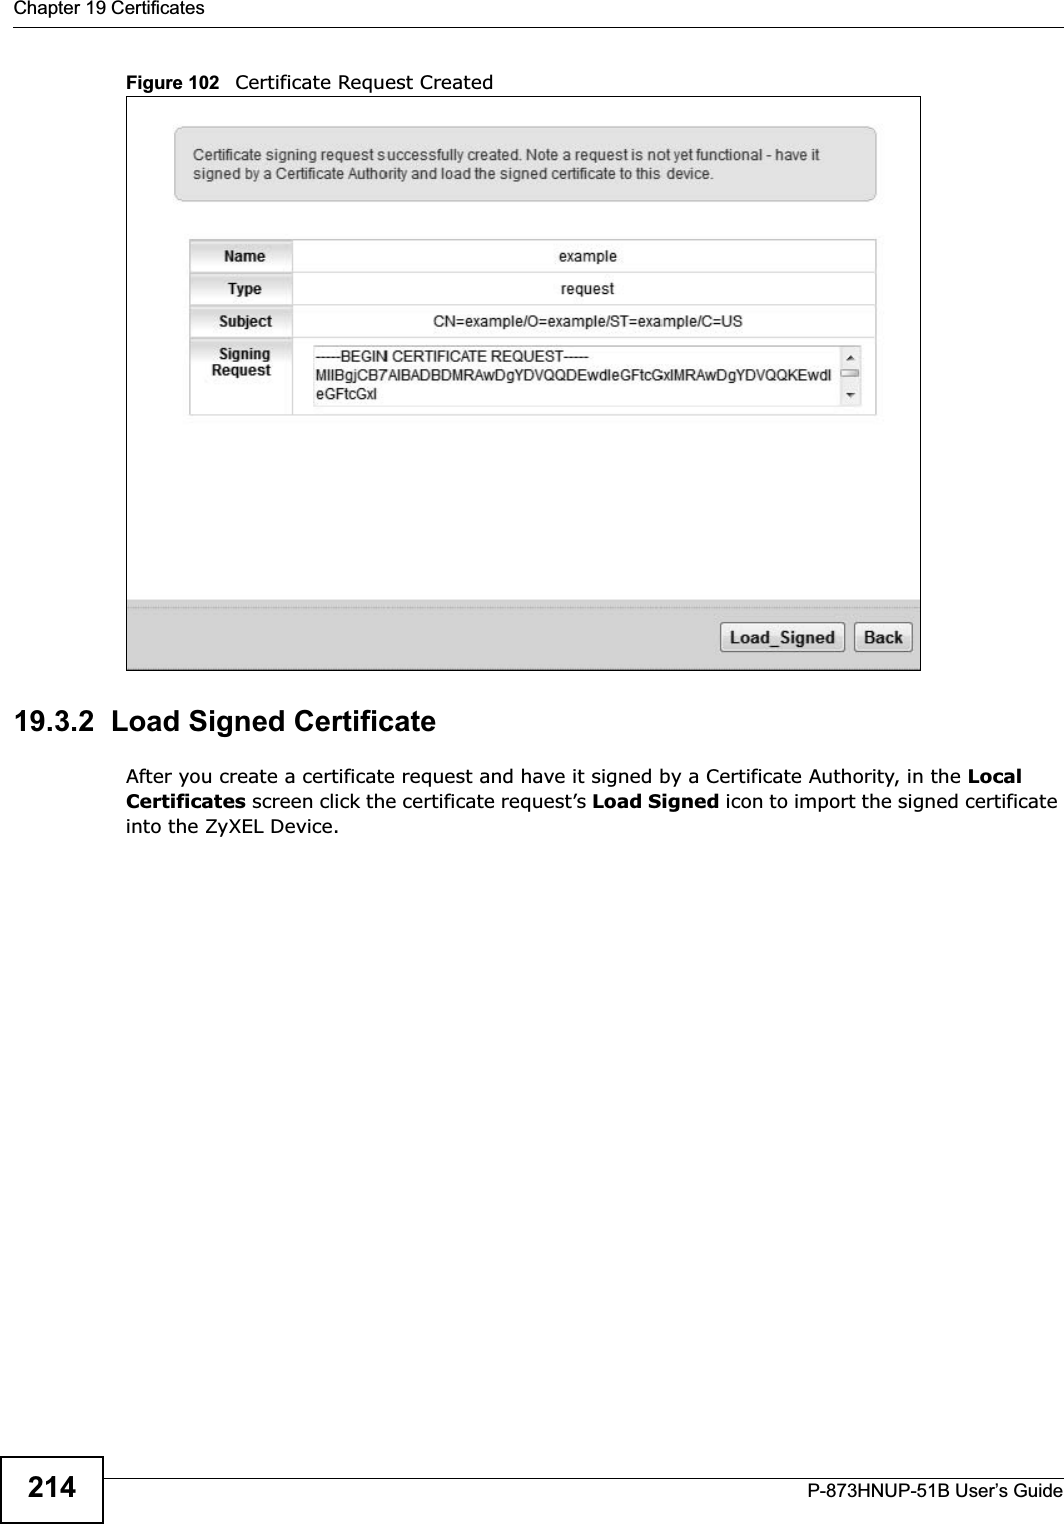 Chapter 19 CertificatesP-873HNUP-51B User’s Guide214Figure 102   Certificate Request Created19.3.2  Load Signed Certificate After you create a certificate request and have it signed by a Certificate Authority, in the LocalCertificates screen click the certificate request’s Load Signed icon to import the signed certificate into the ZyXEL Device. 